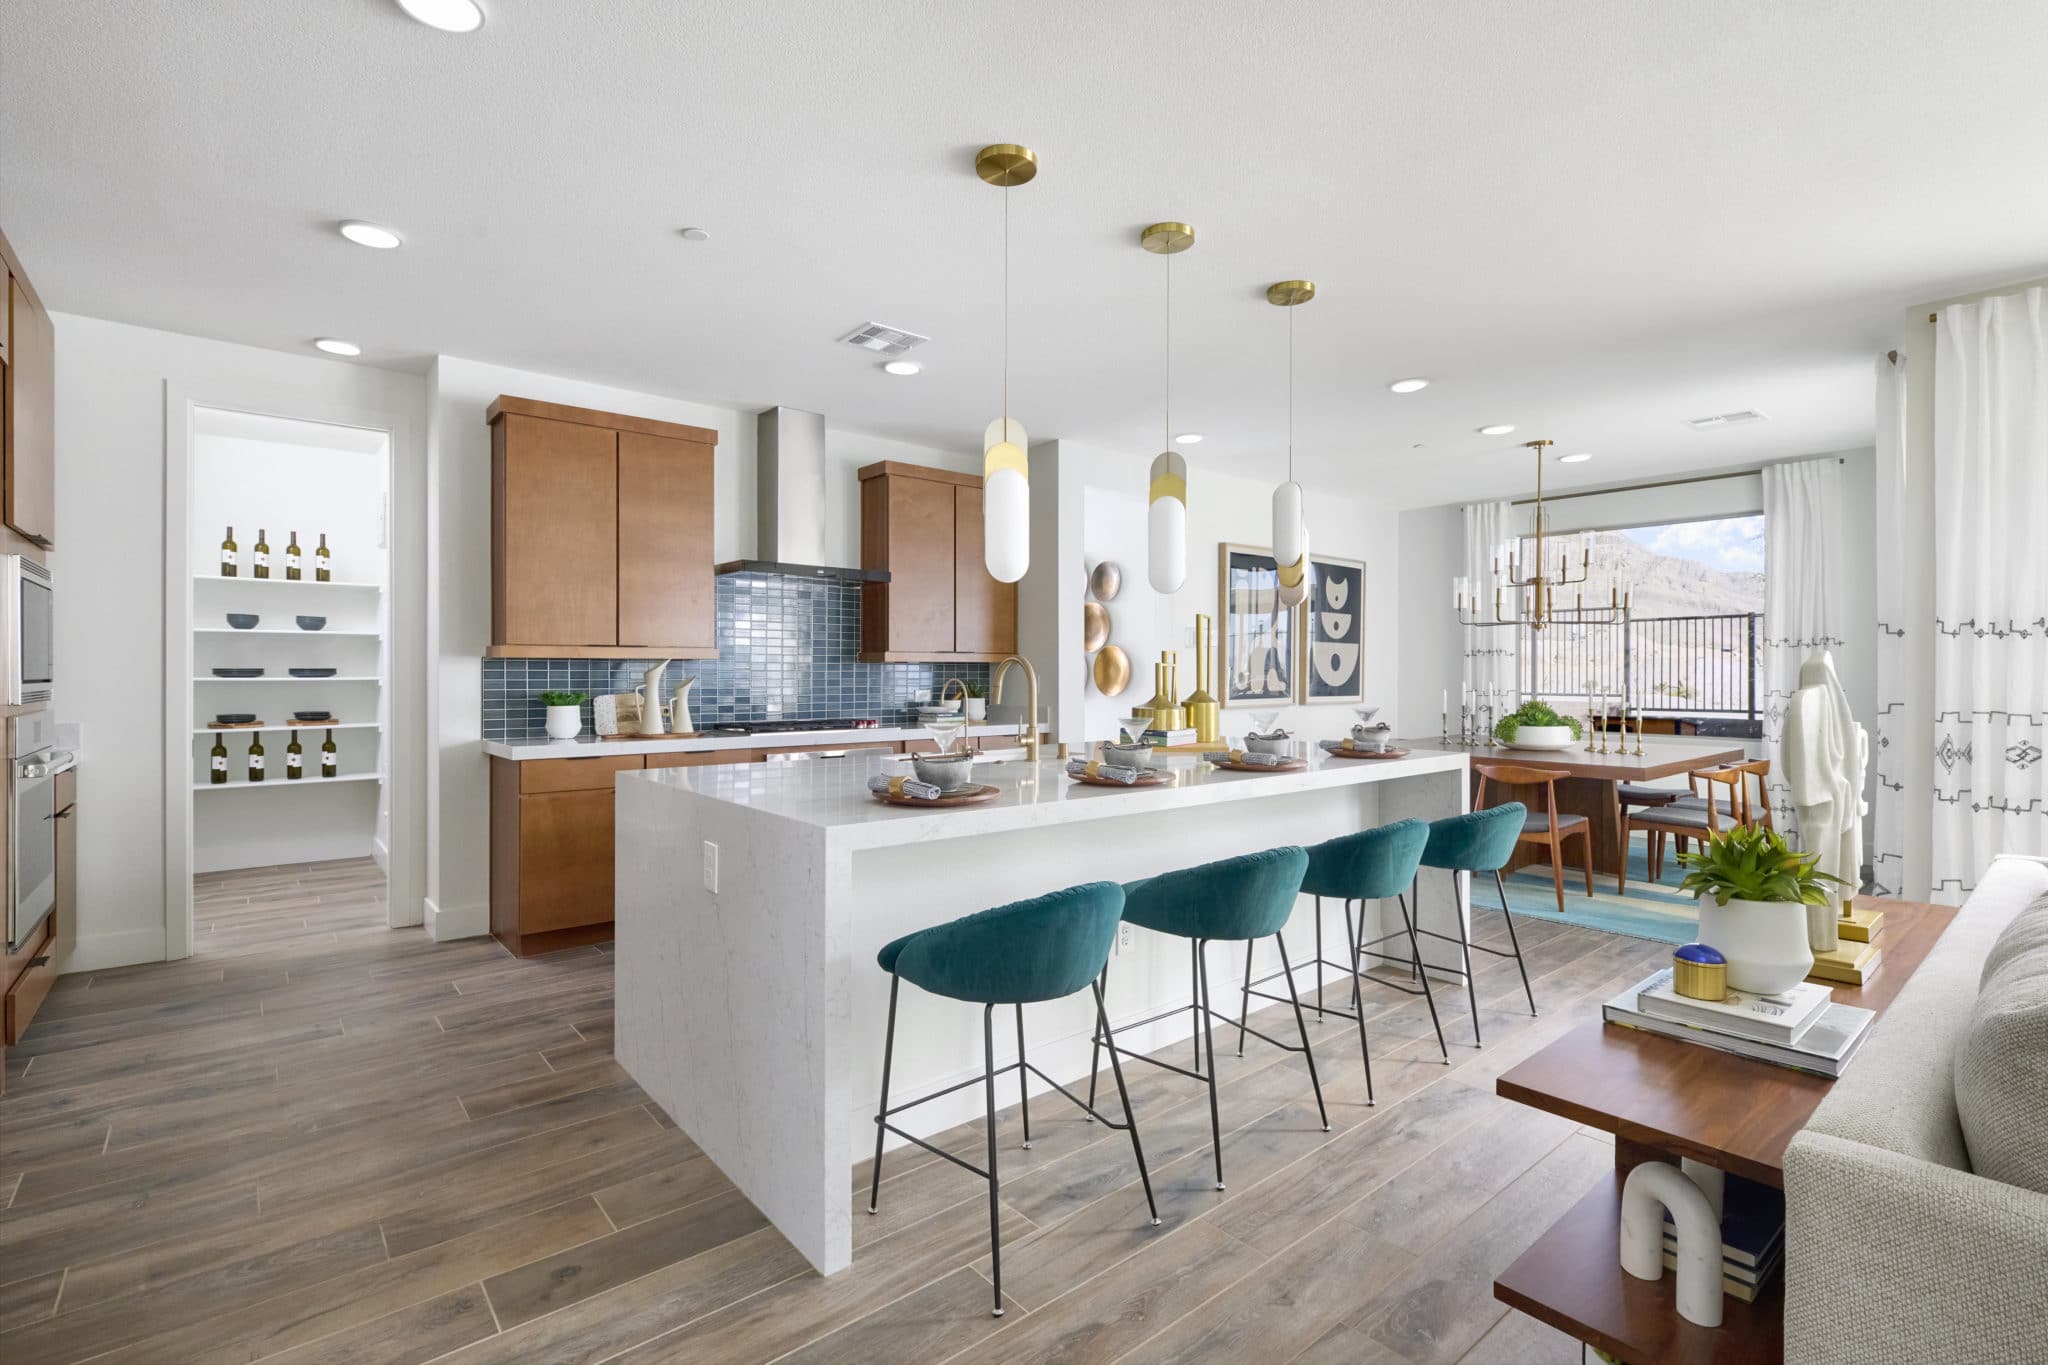 Kitchen of Plan 3 at Kings Canyon by Tri Pointe Homes